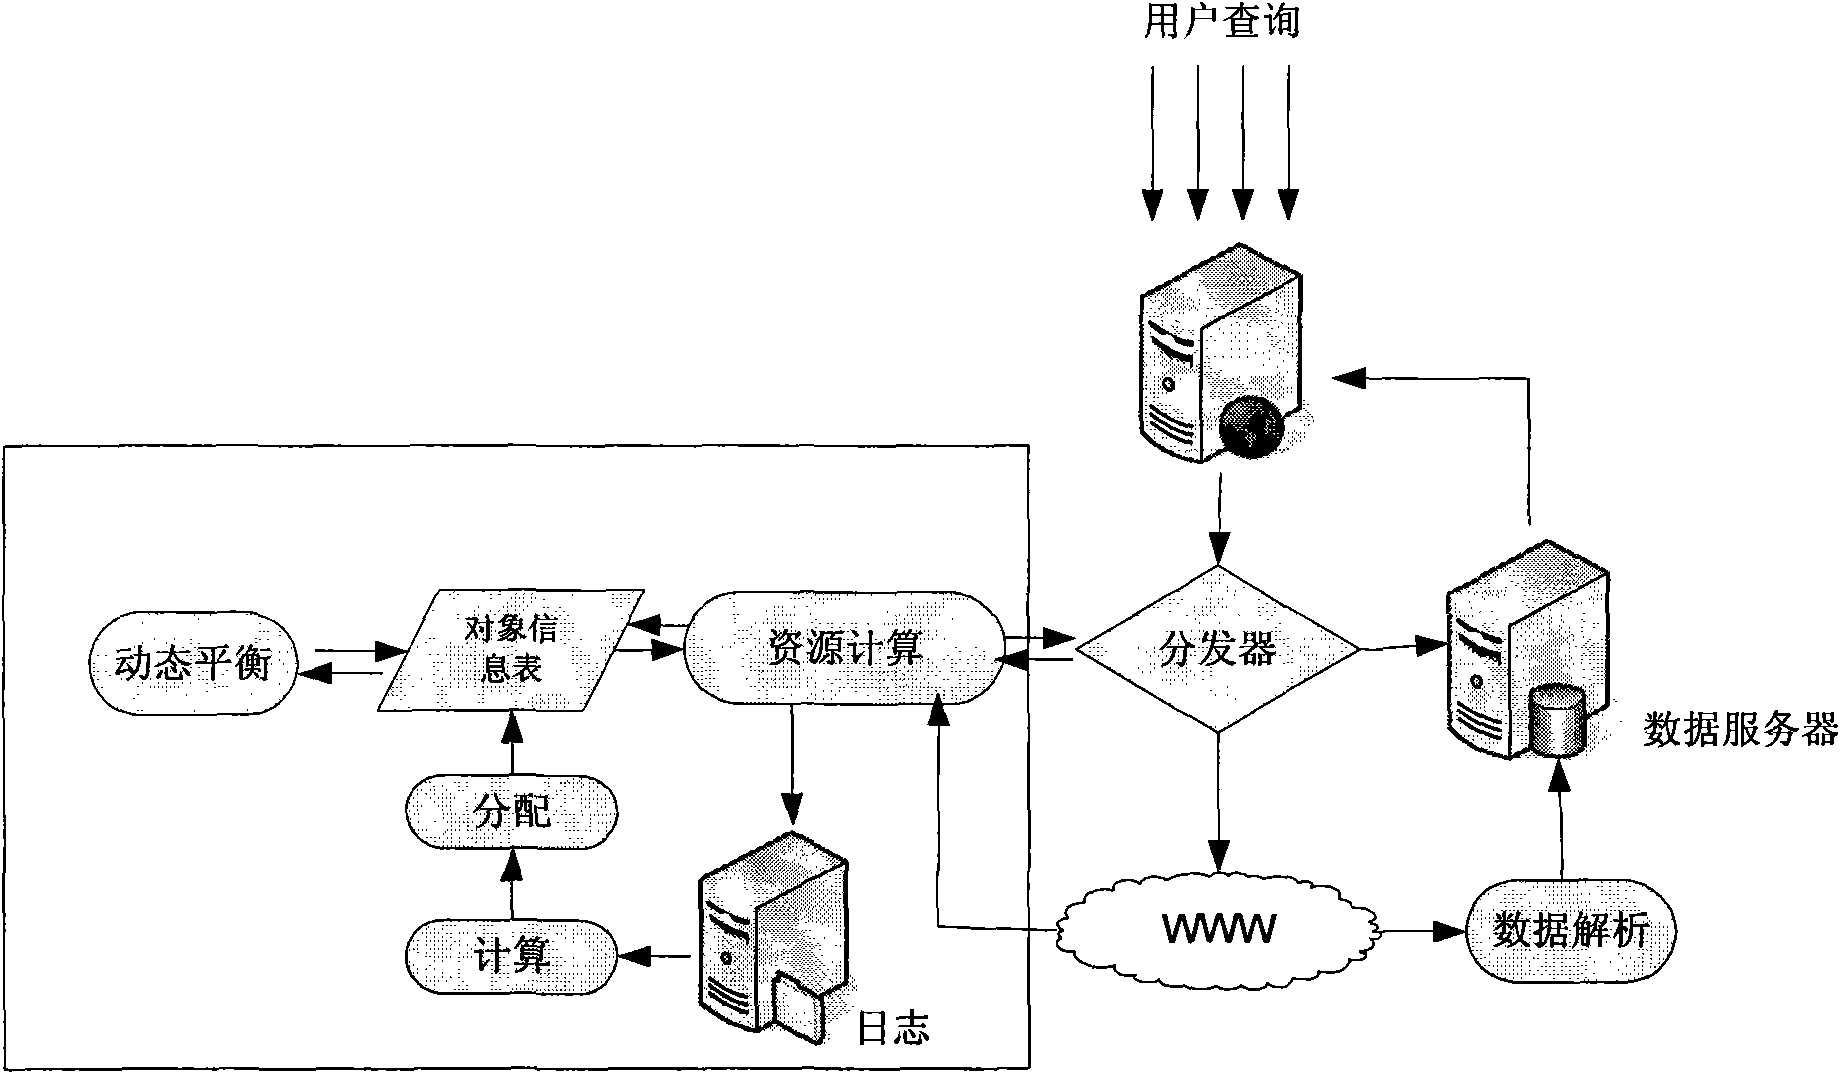 Cache optimization method of real-time vertical search engine objects